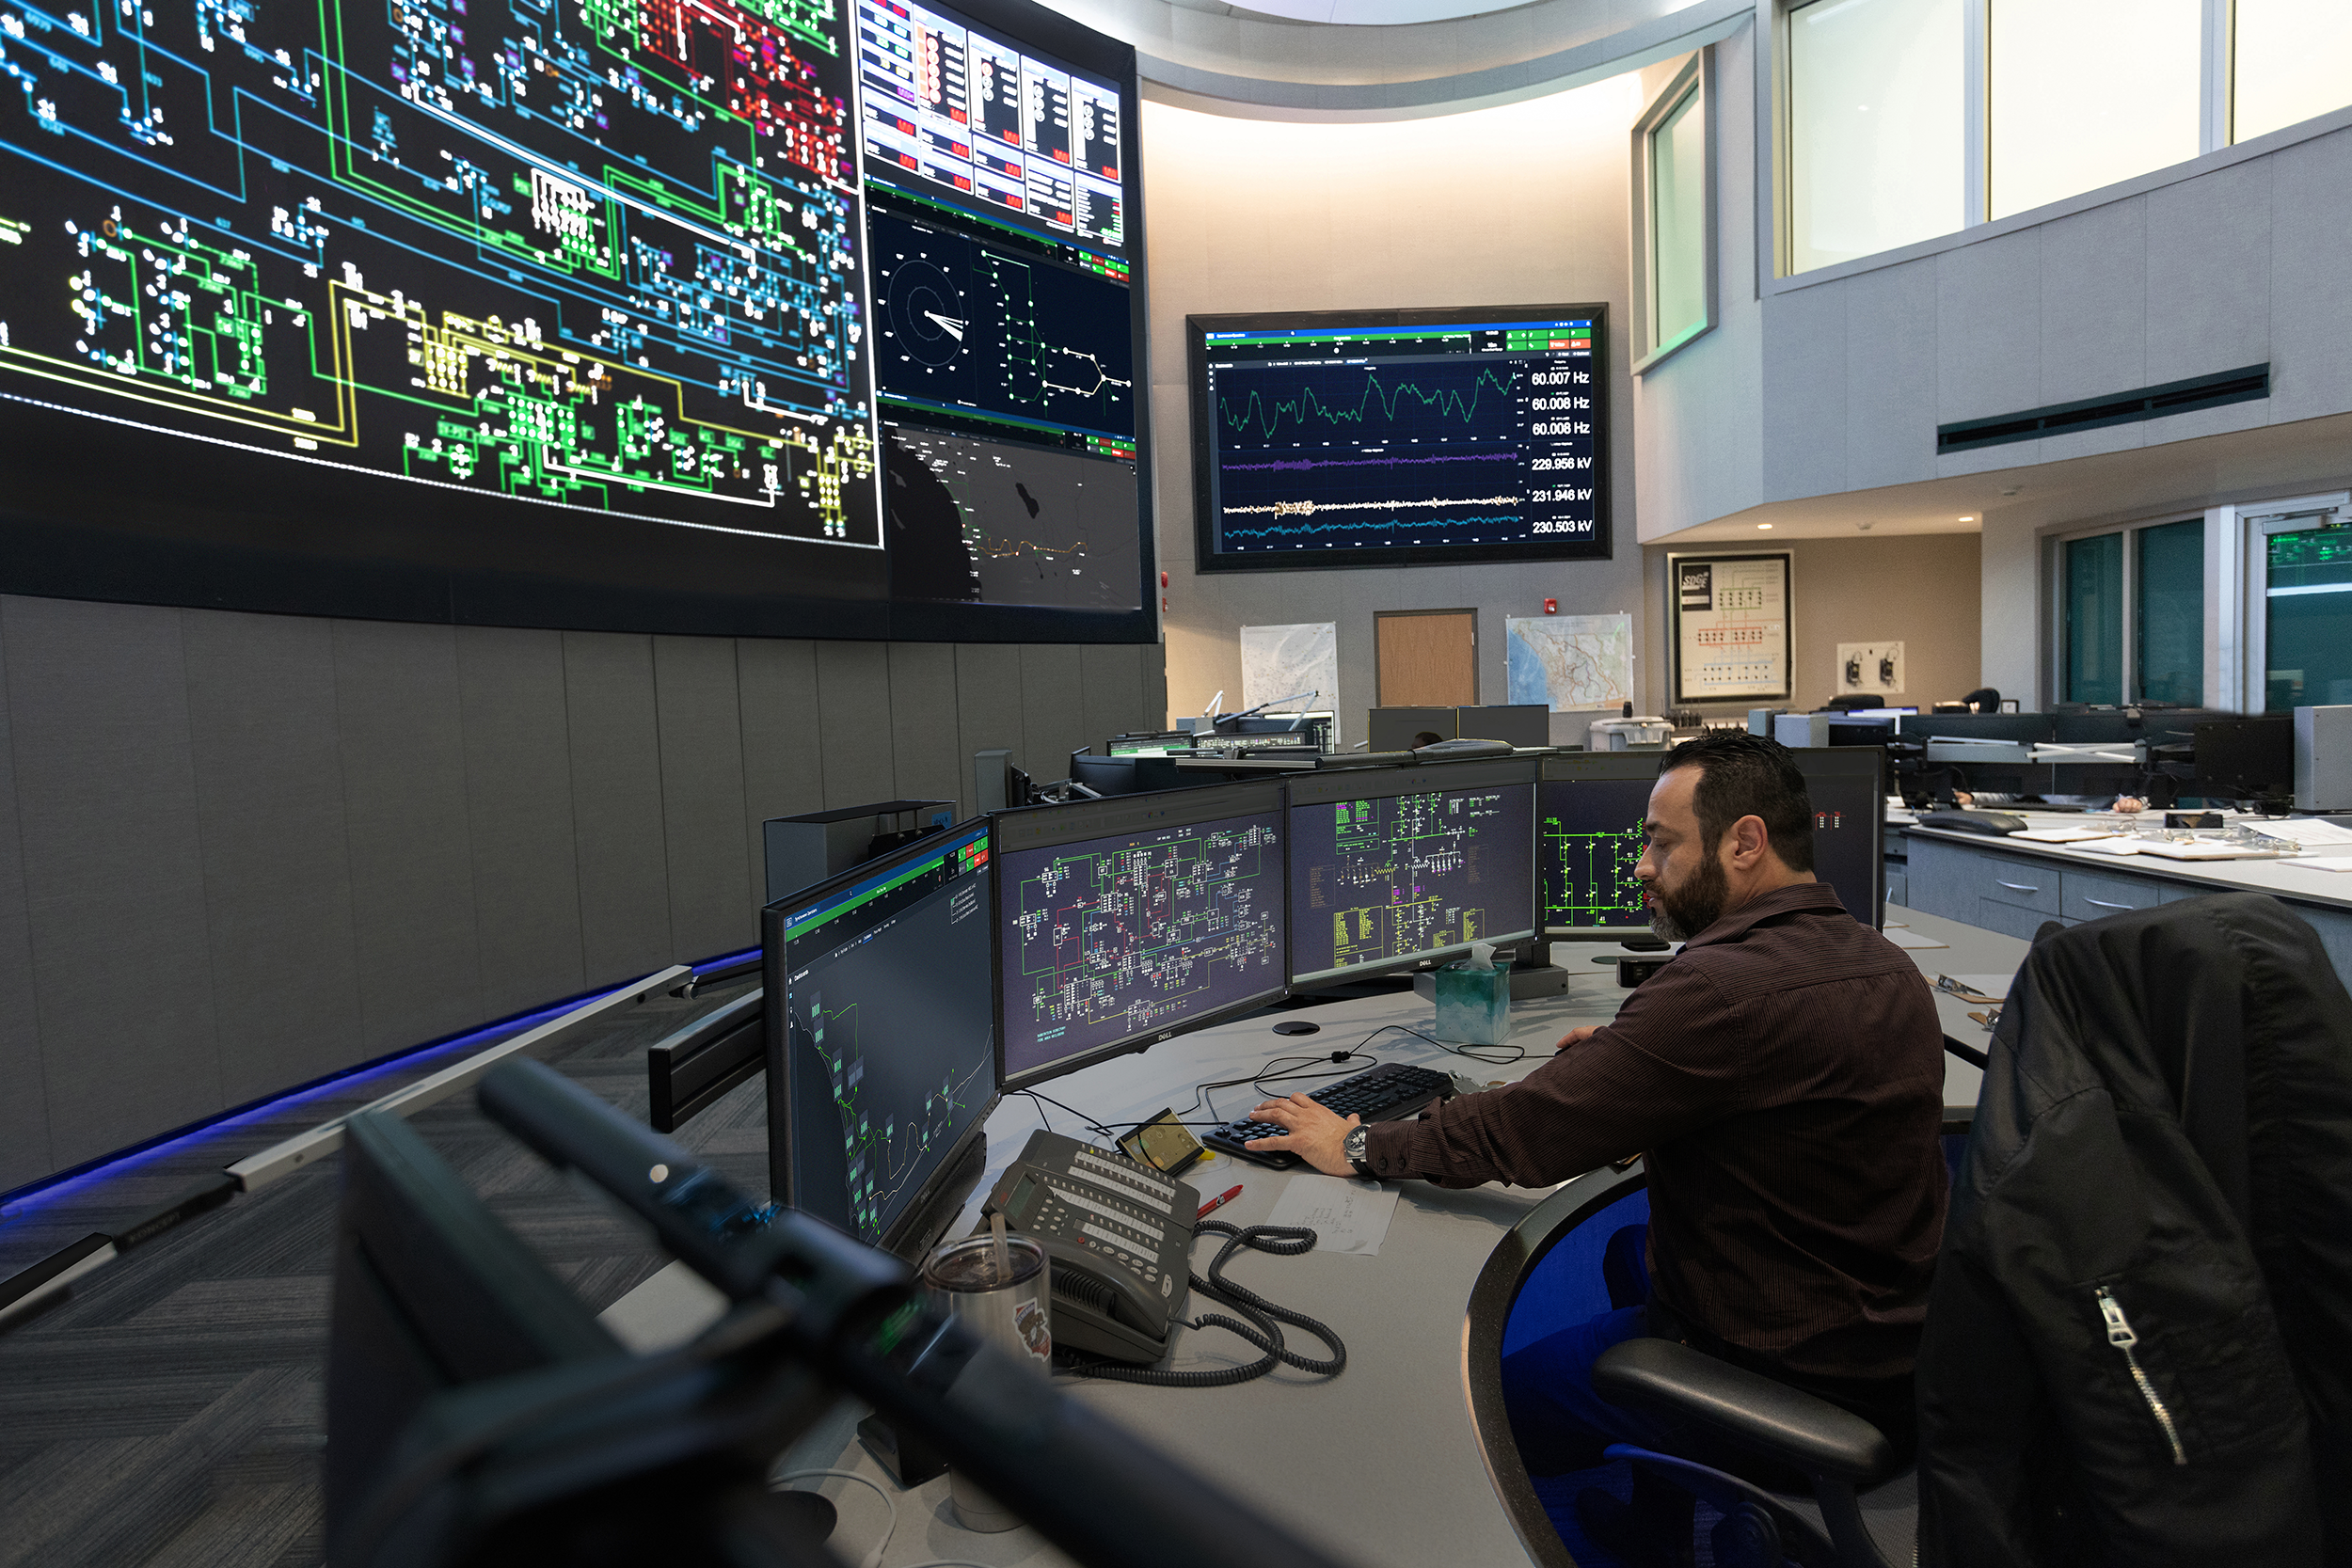 San Diego Utility Helps Shape the Future of Grid Operations